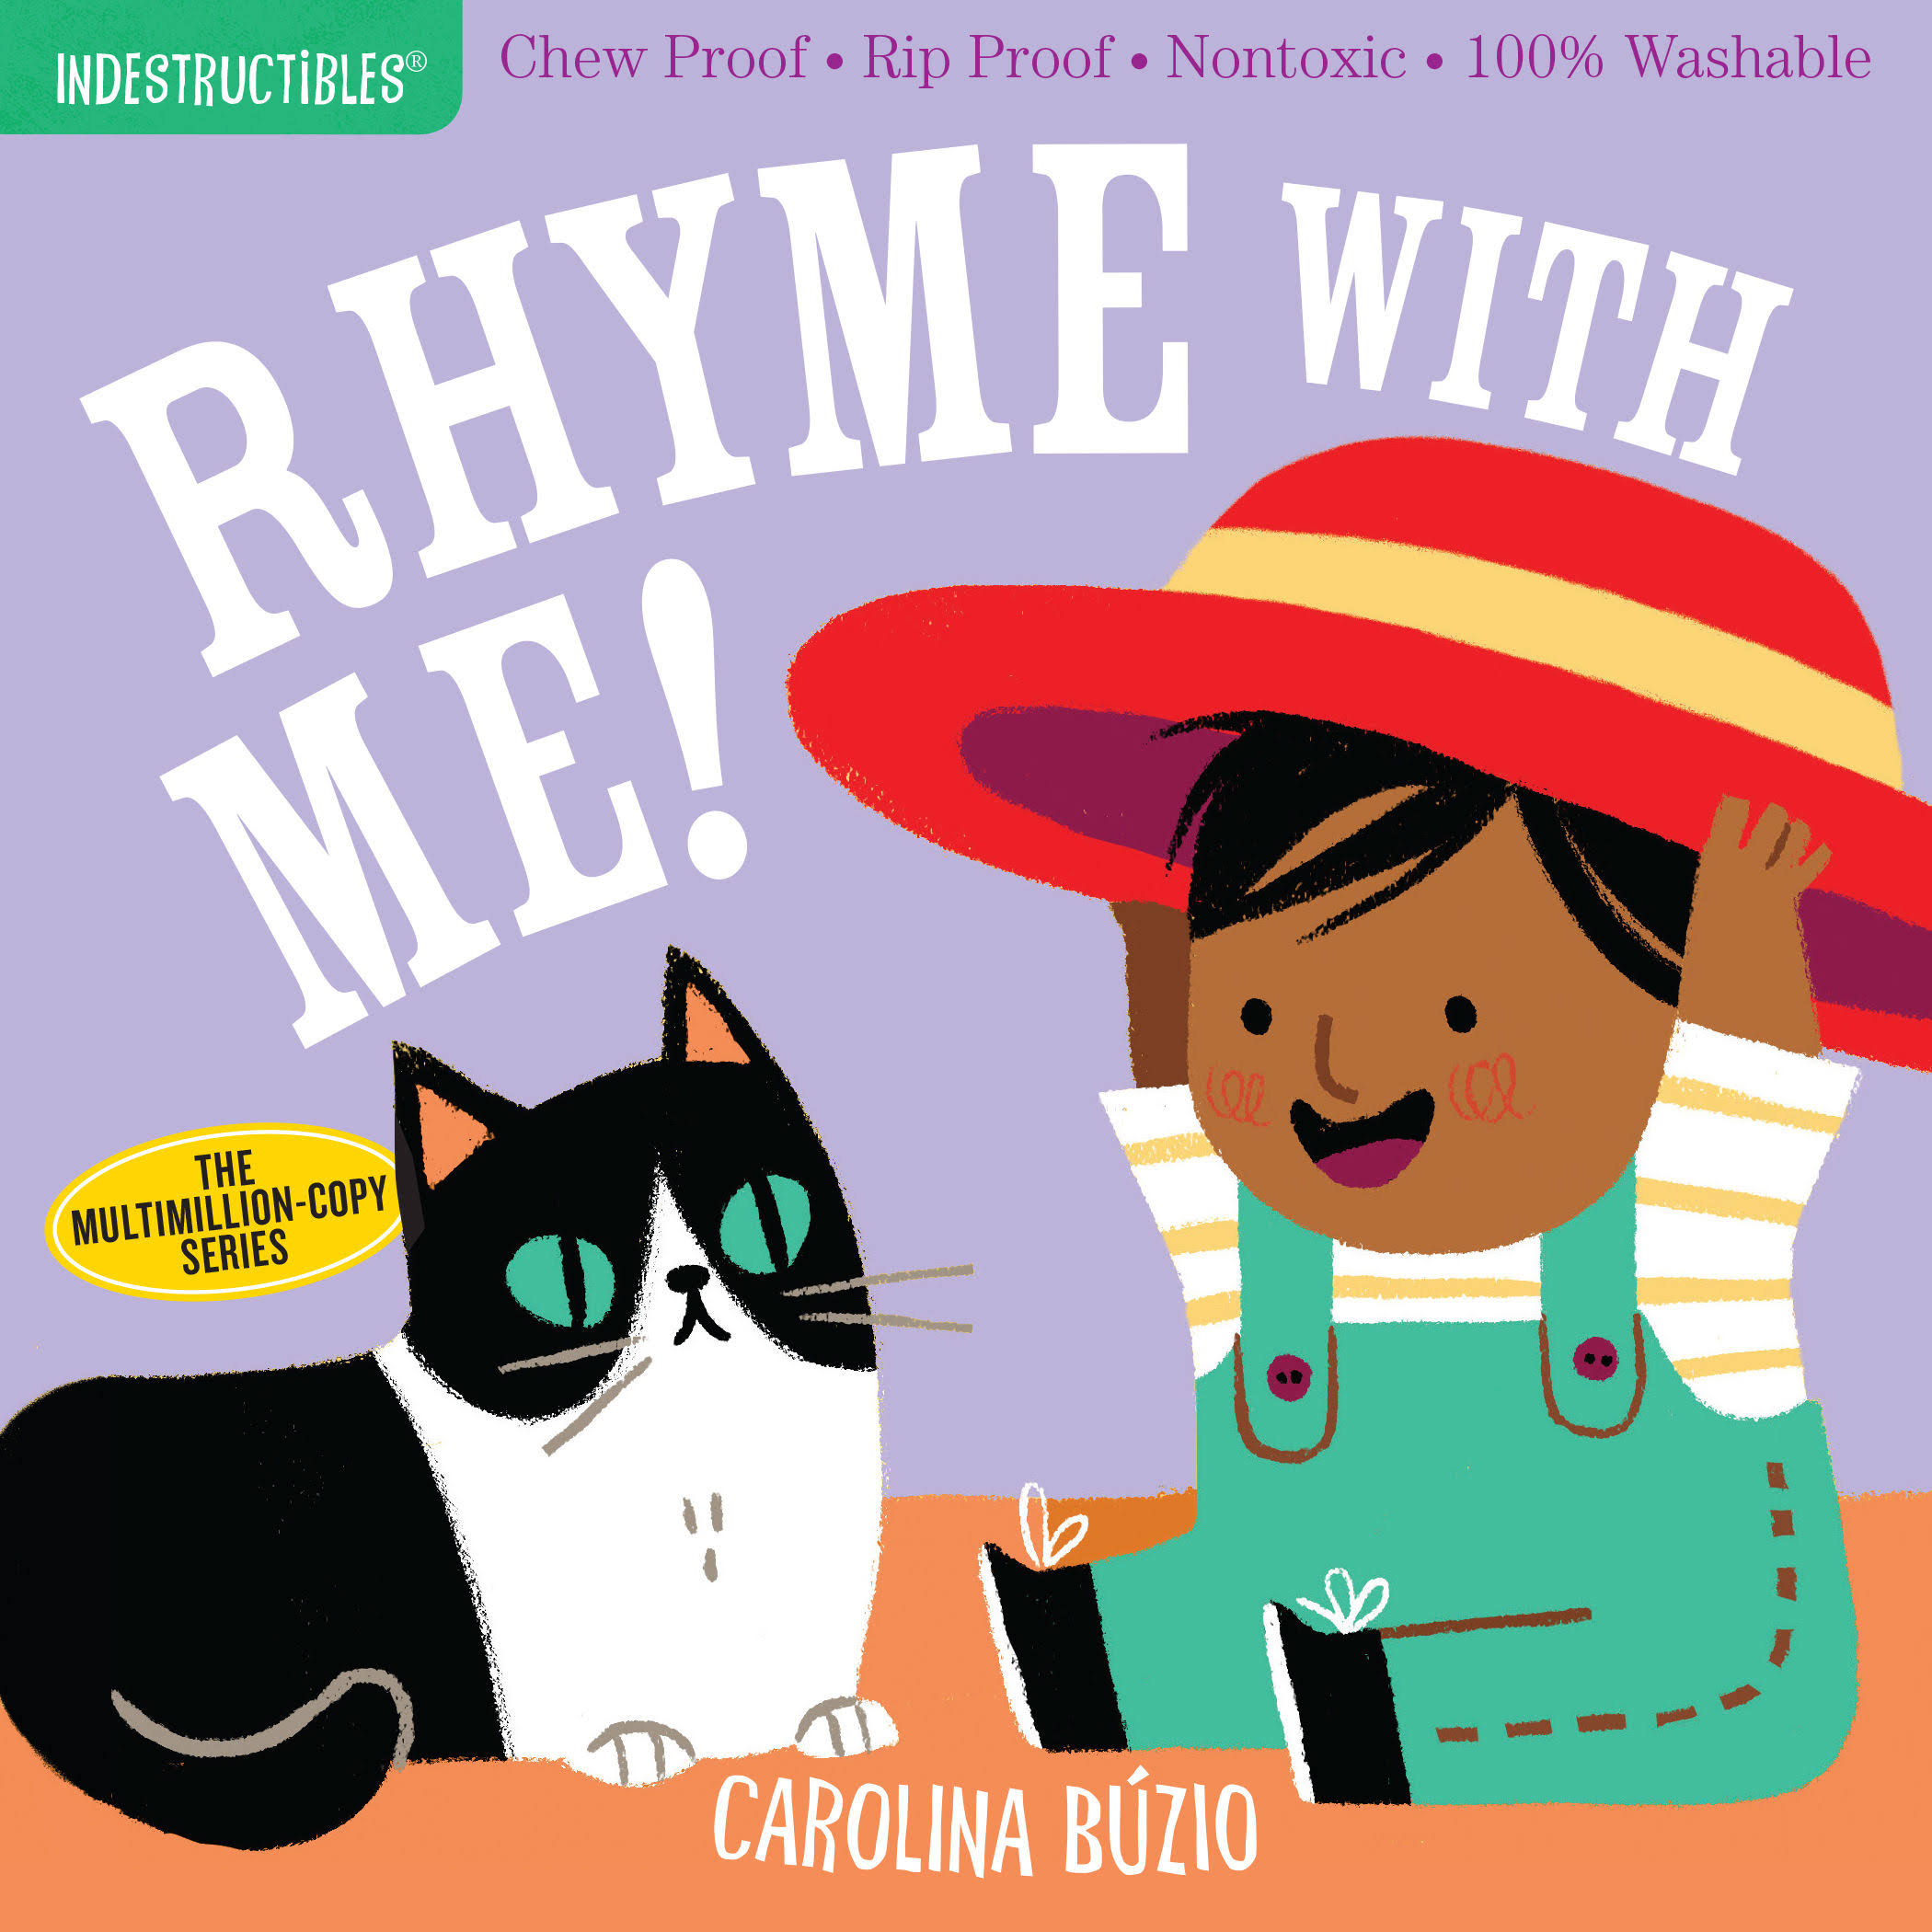 Indestructibles: Rhyme with Me!: Chew Proof · Rip Proof · Nontoxic · 100% Washable (Book for Babies, Newborn Books, Safe to Chew) [Book]